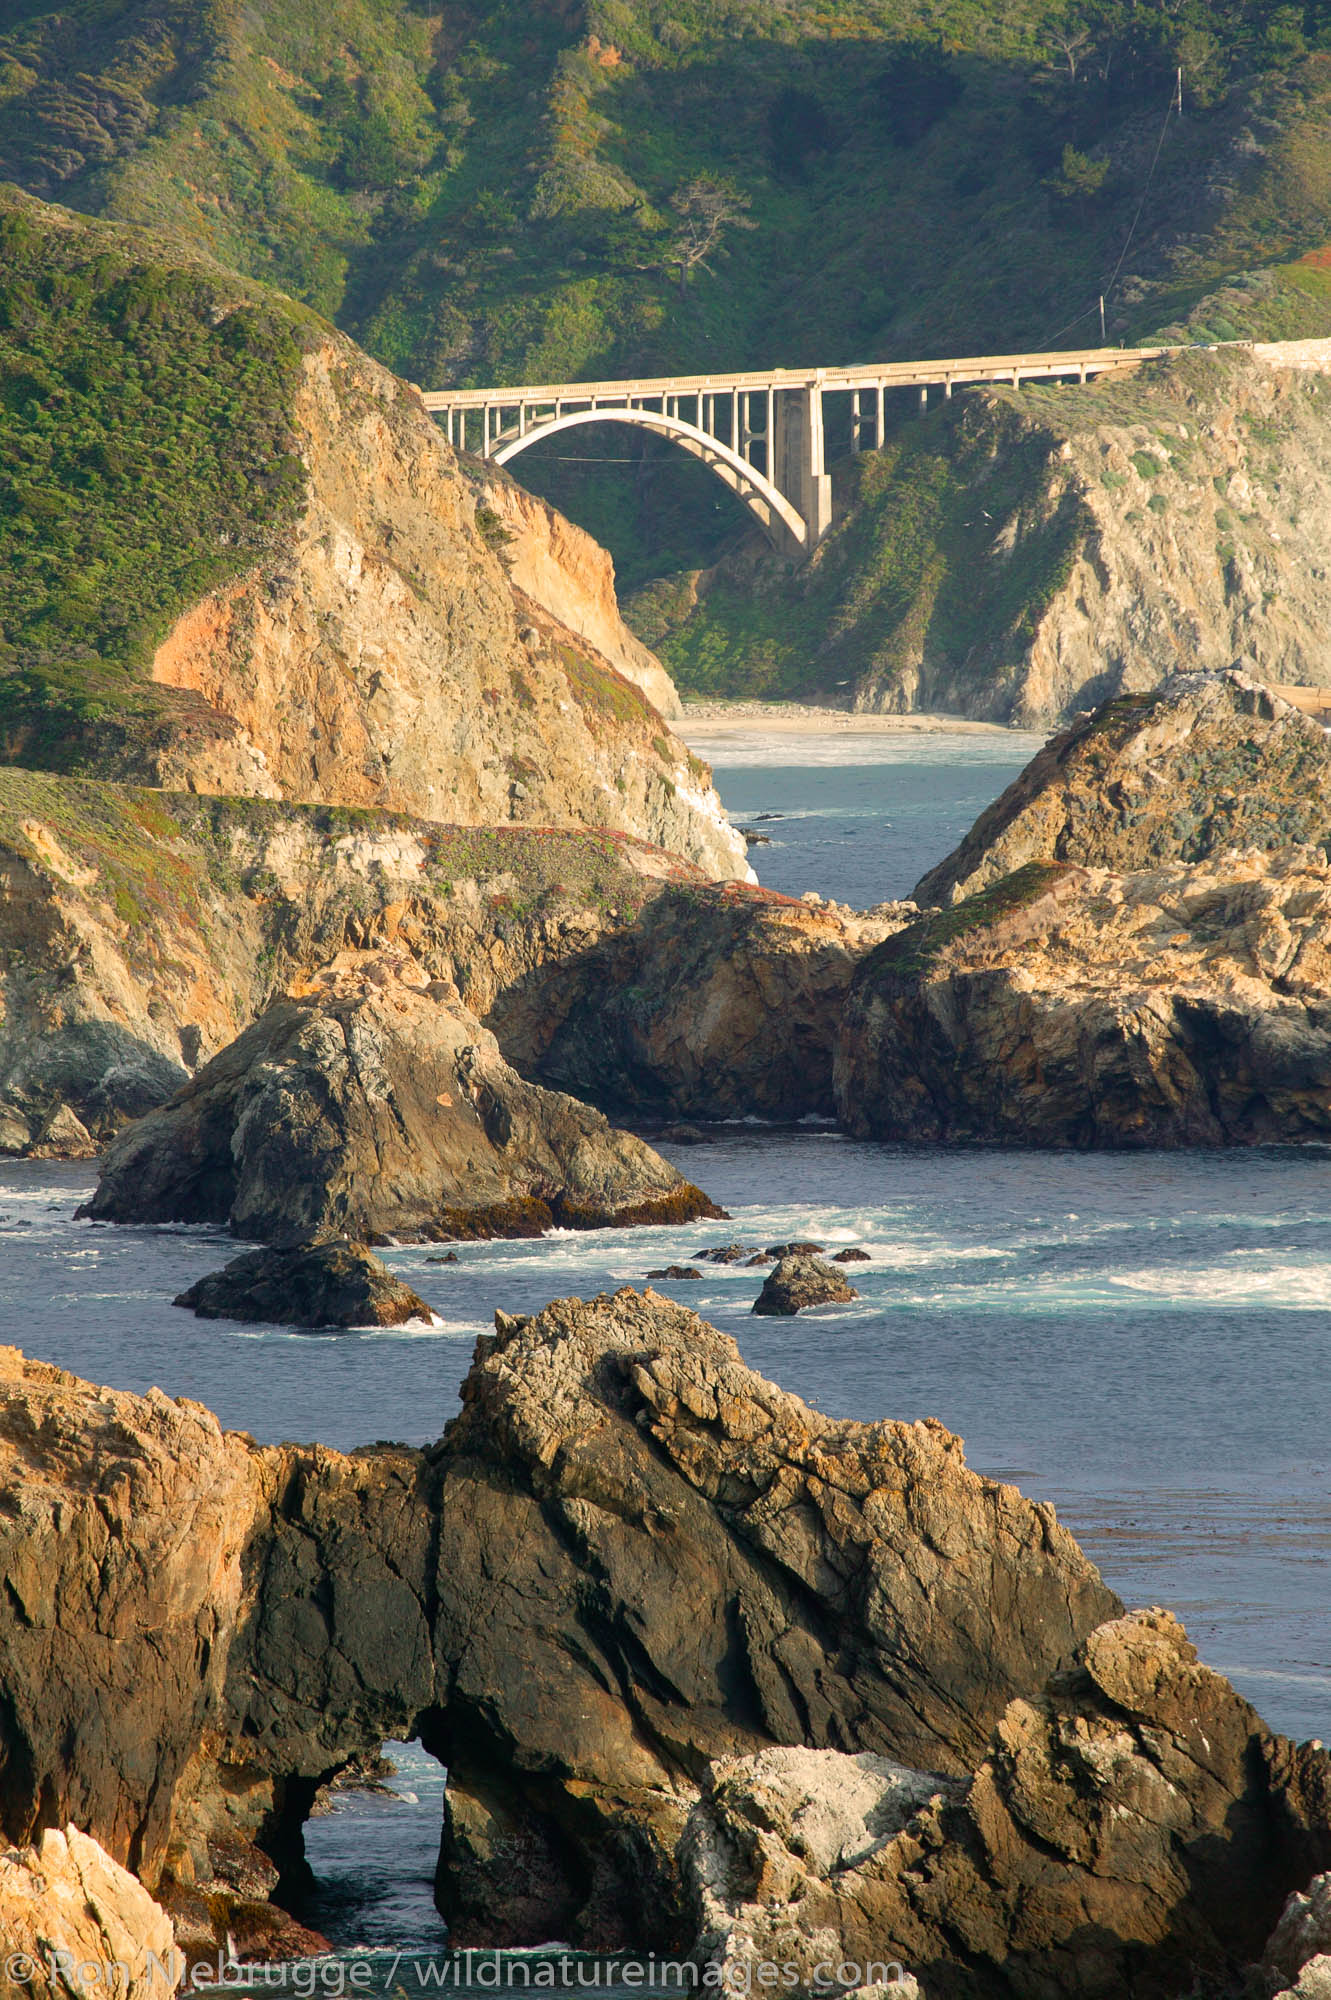 The Rocky Creek Bridge and Highway 1 along the Central Coast, Big Sur, California.